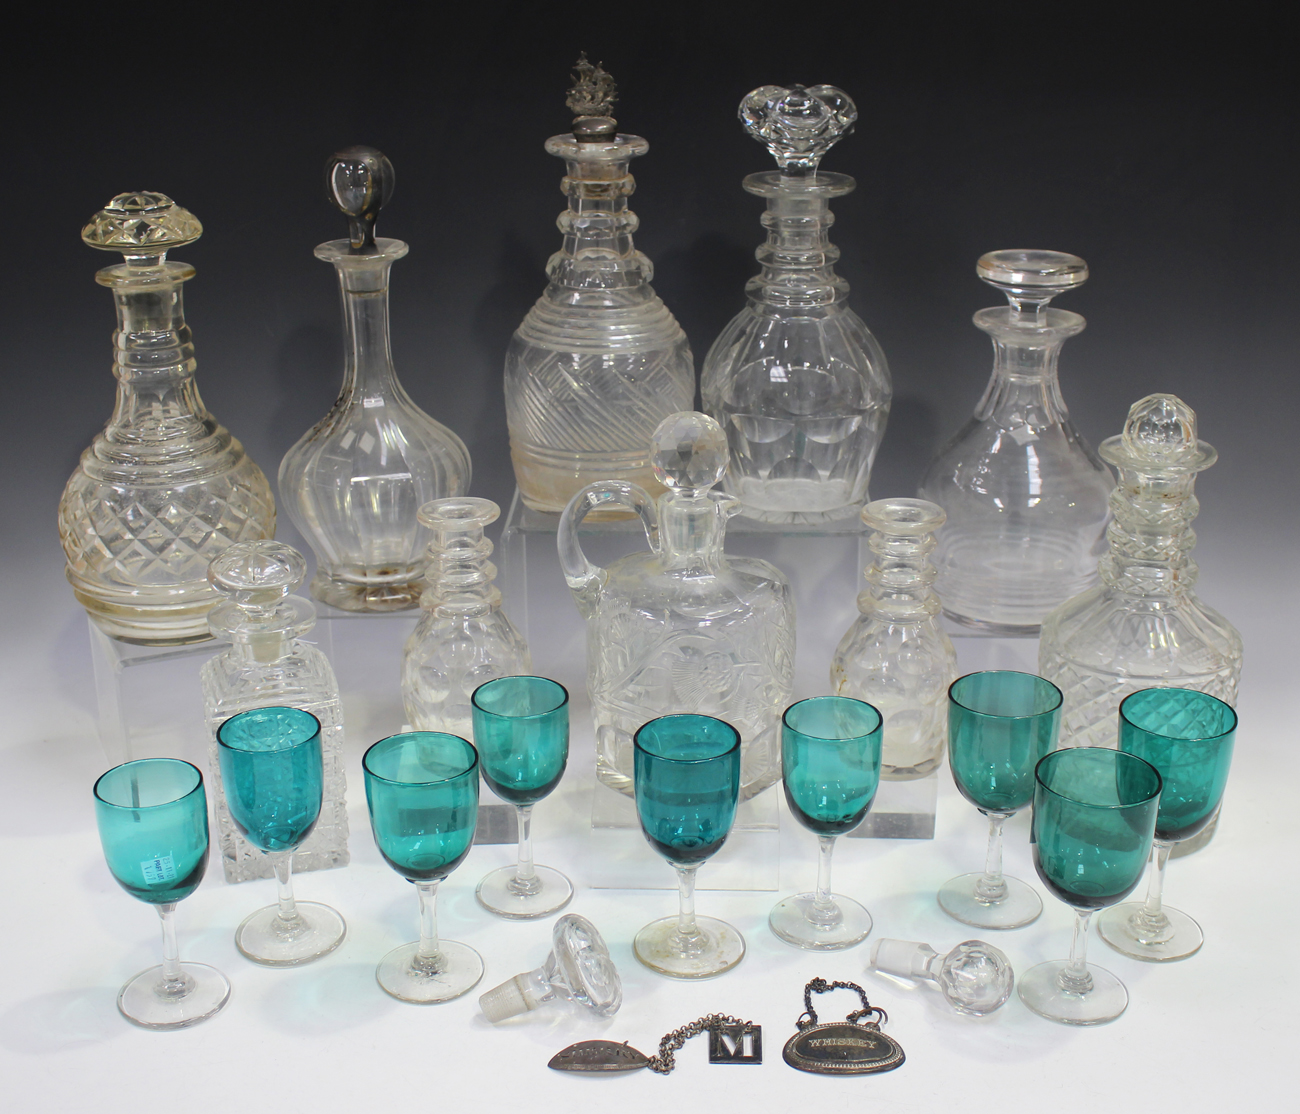 A group of 19th century and later glassware, including a whisky jug, decorated with thistles, height